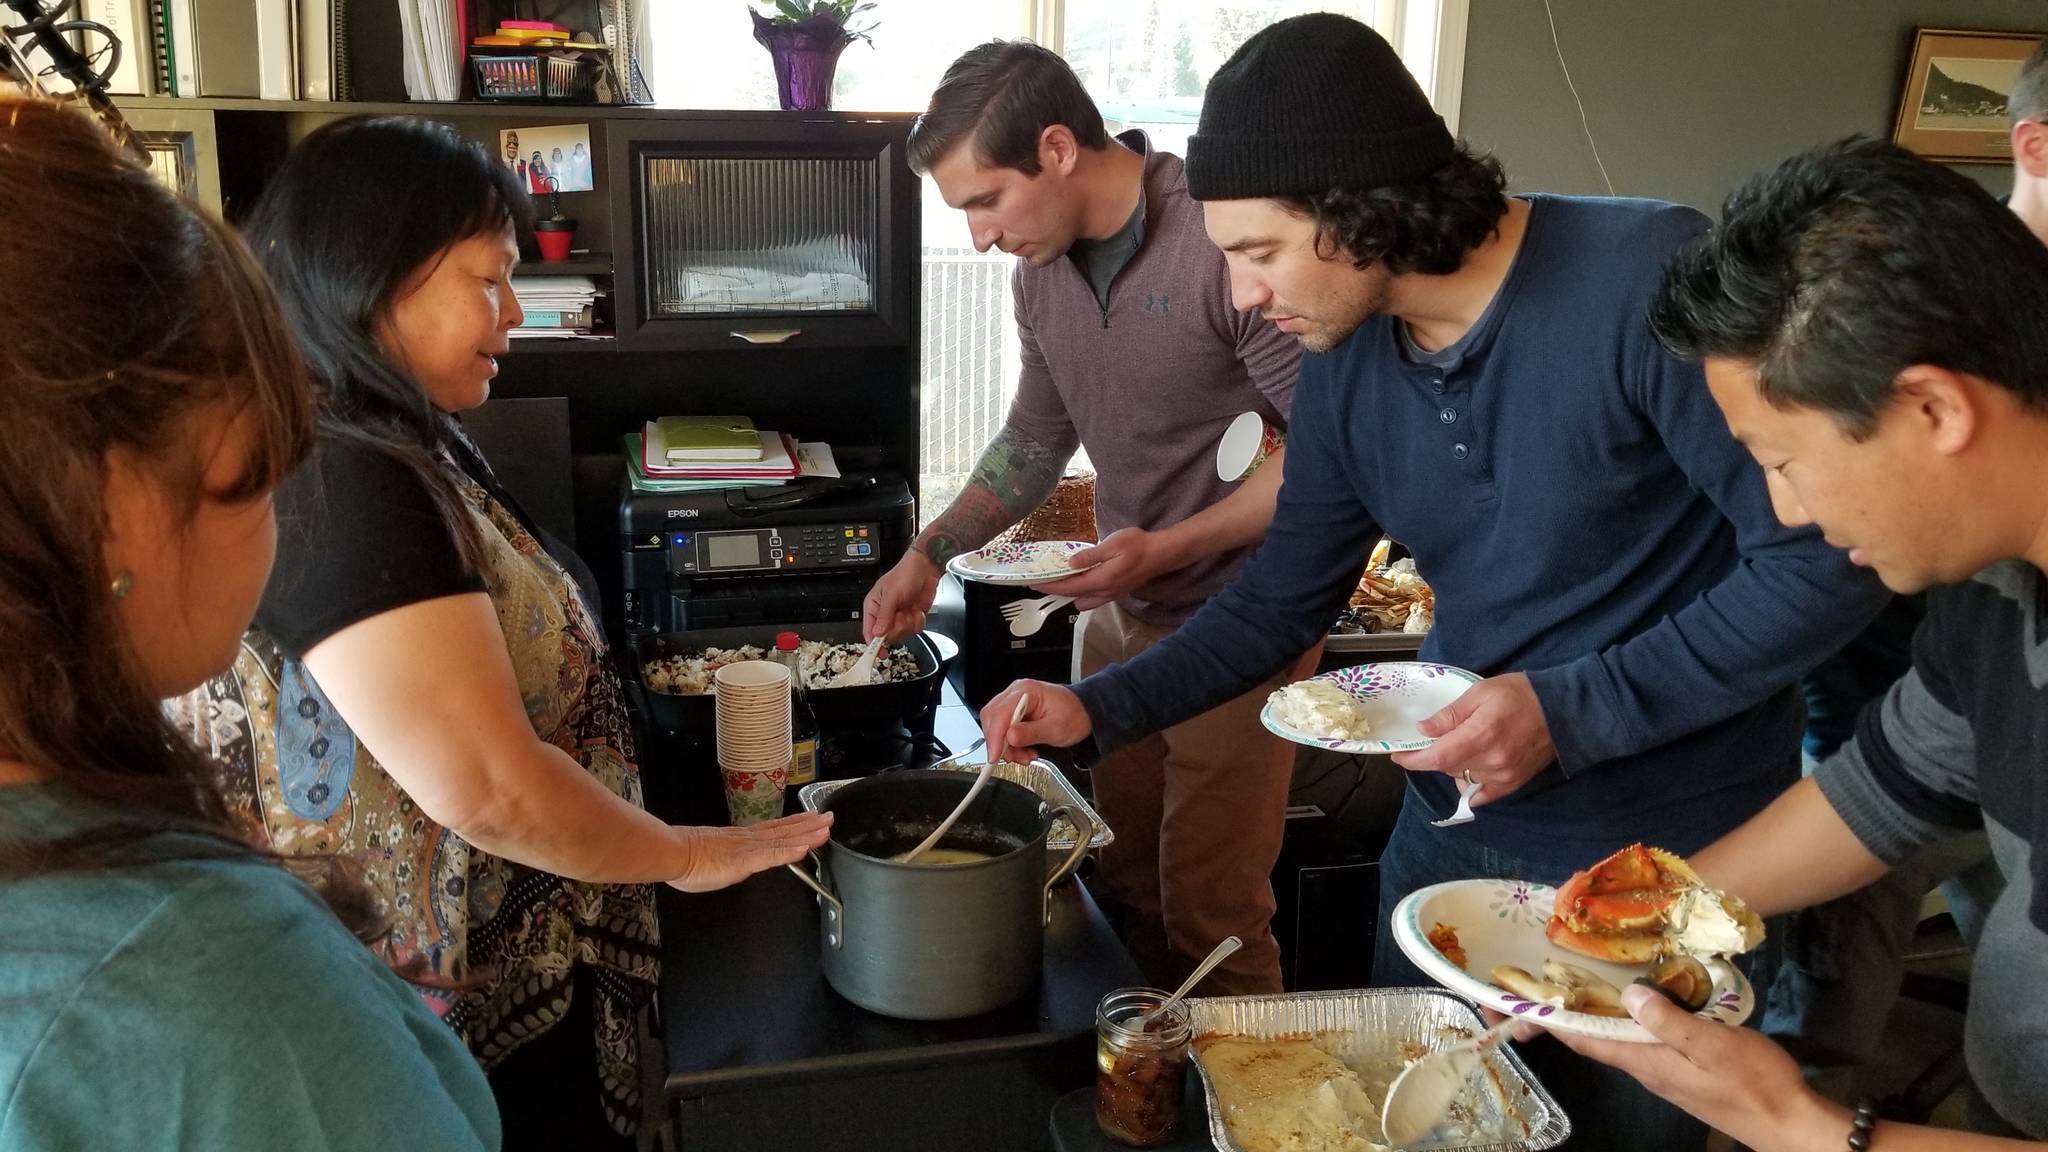 Members of the Xbox and Dontnod Entertainment team load up their plates with food during a visit to Hoonah. The Southeast Alaska village, Huna Heritage Foundation and Hoonah-based artists helped inspire the setting of the game “Tell Me Why.” Chapters of the episodic narrative adventure game were released in August and September. (Courtesy Photo / Xbox)